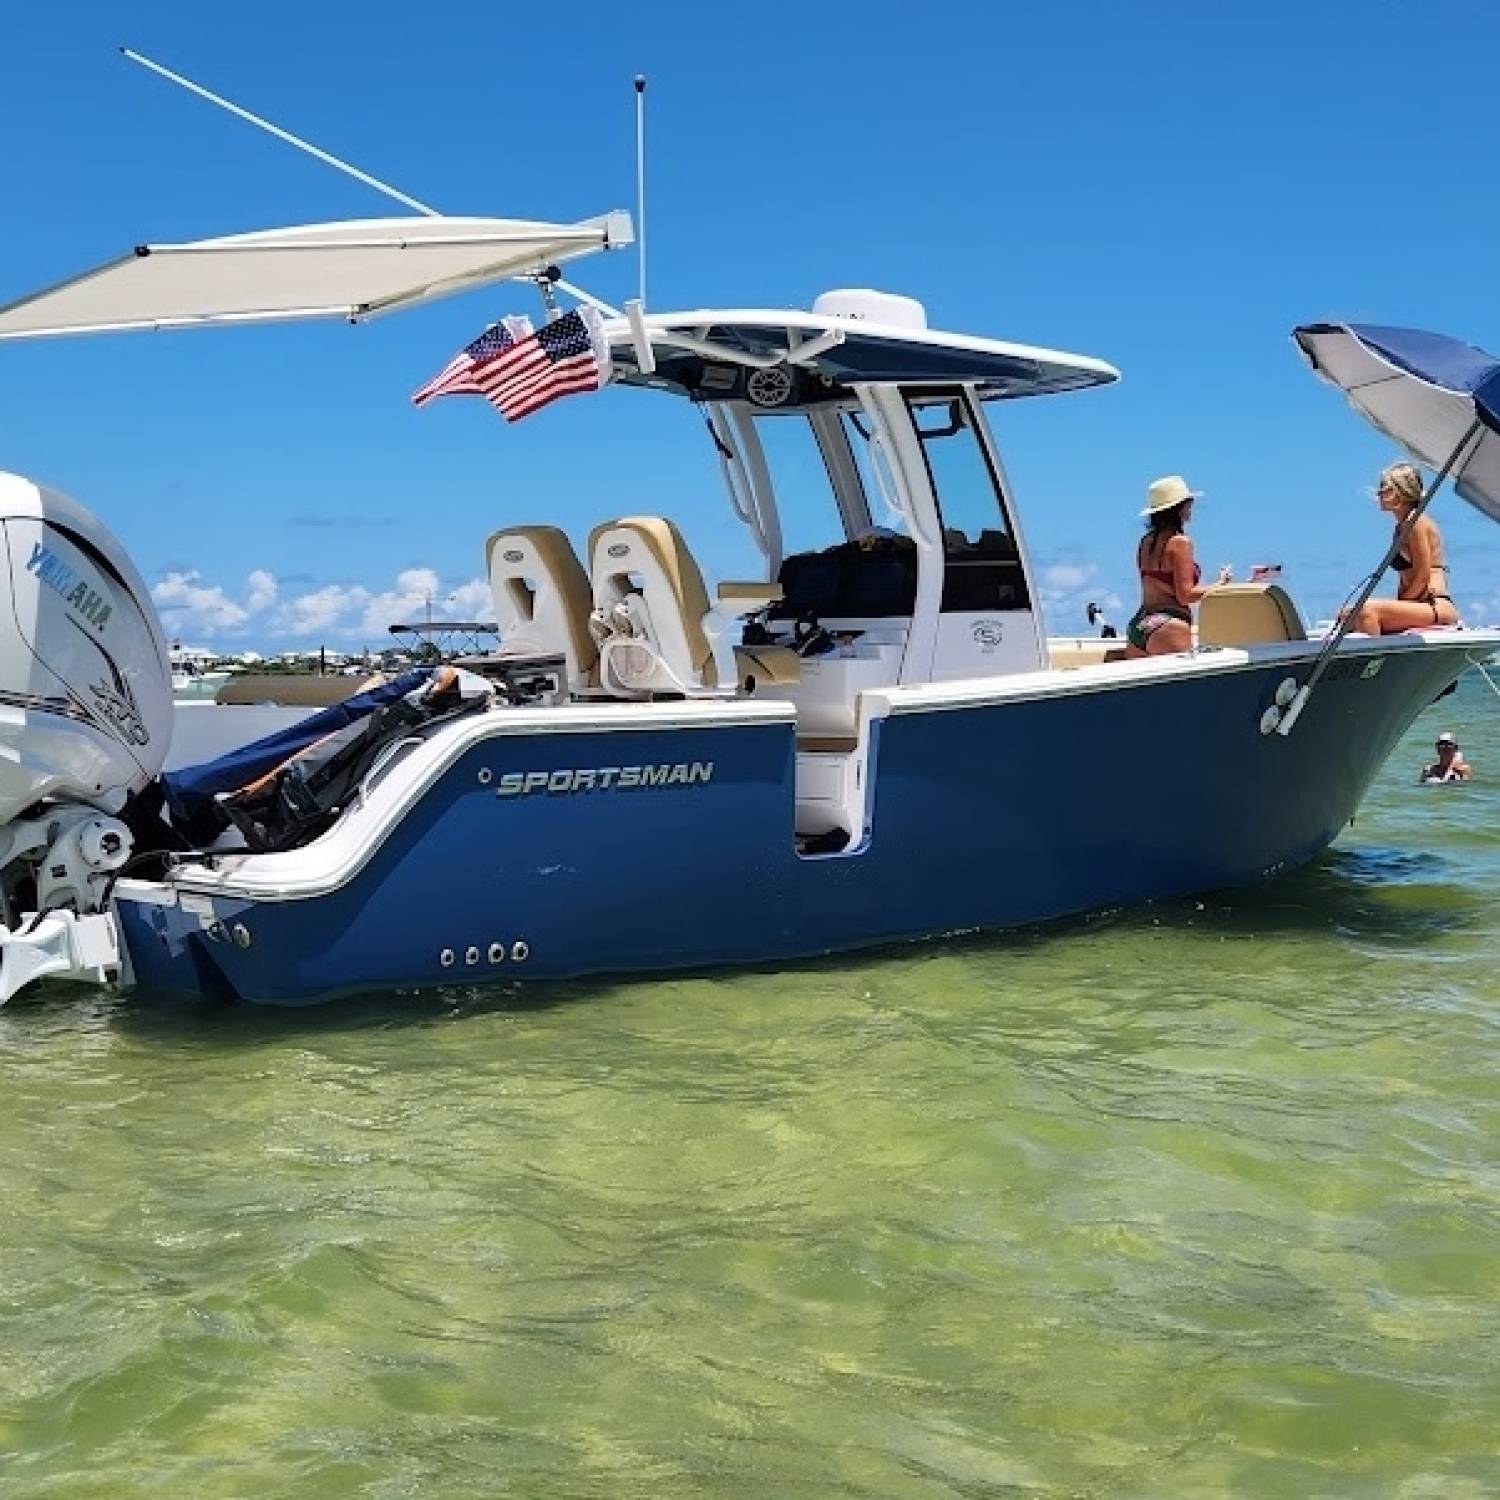 Title: Sandbar on the 4th - On board their Sportsman Heritage 261 Center Console - Location: Orange Beach Alabama. Participating in the Photo Contest #SportsmanJuly2024